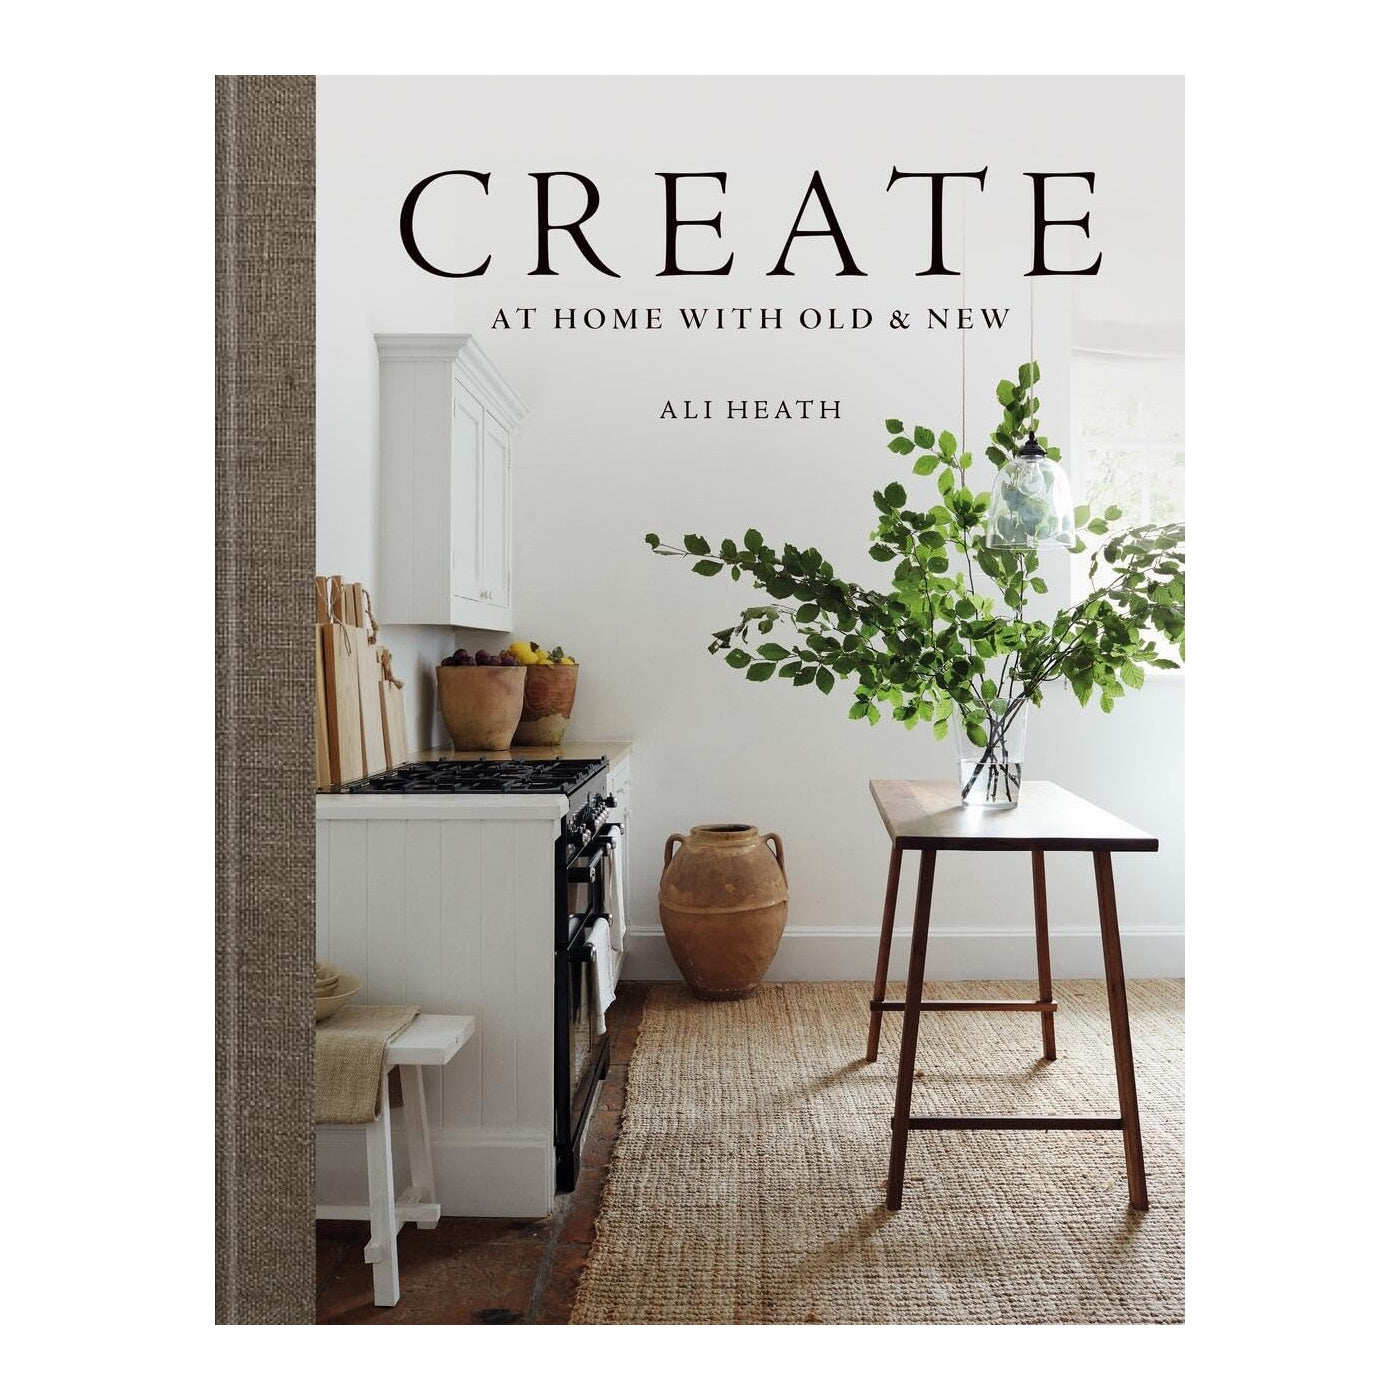 Create at home with old & new book